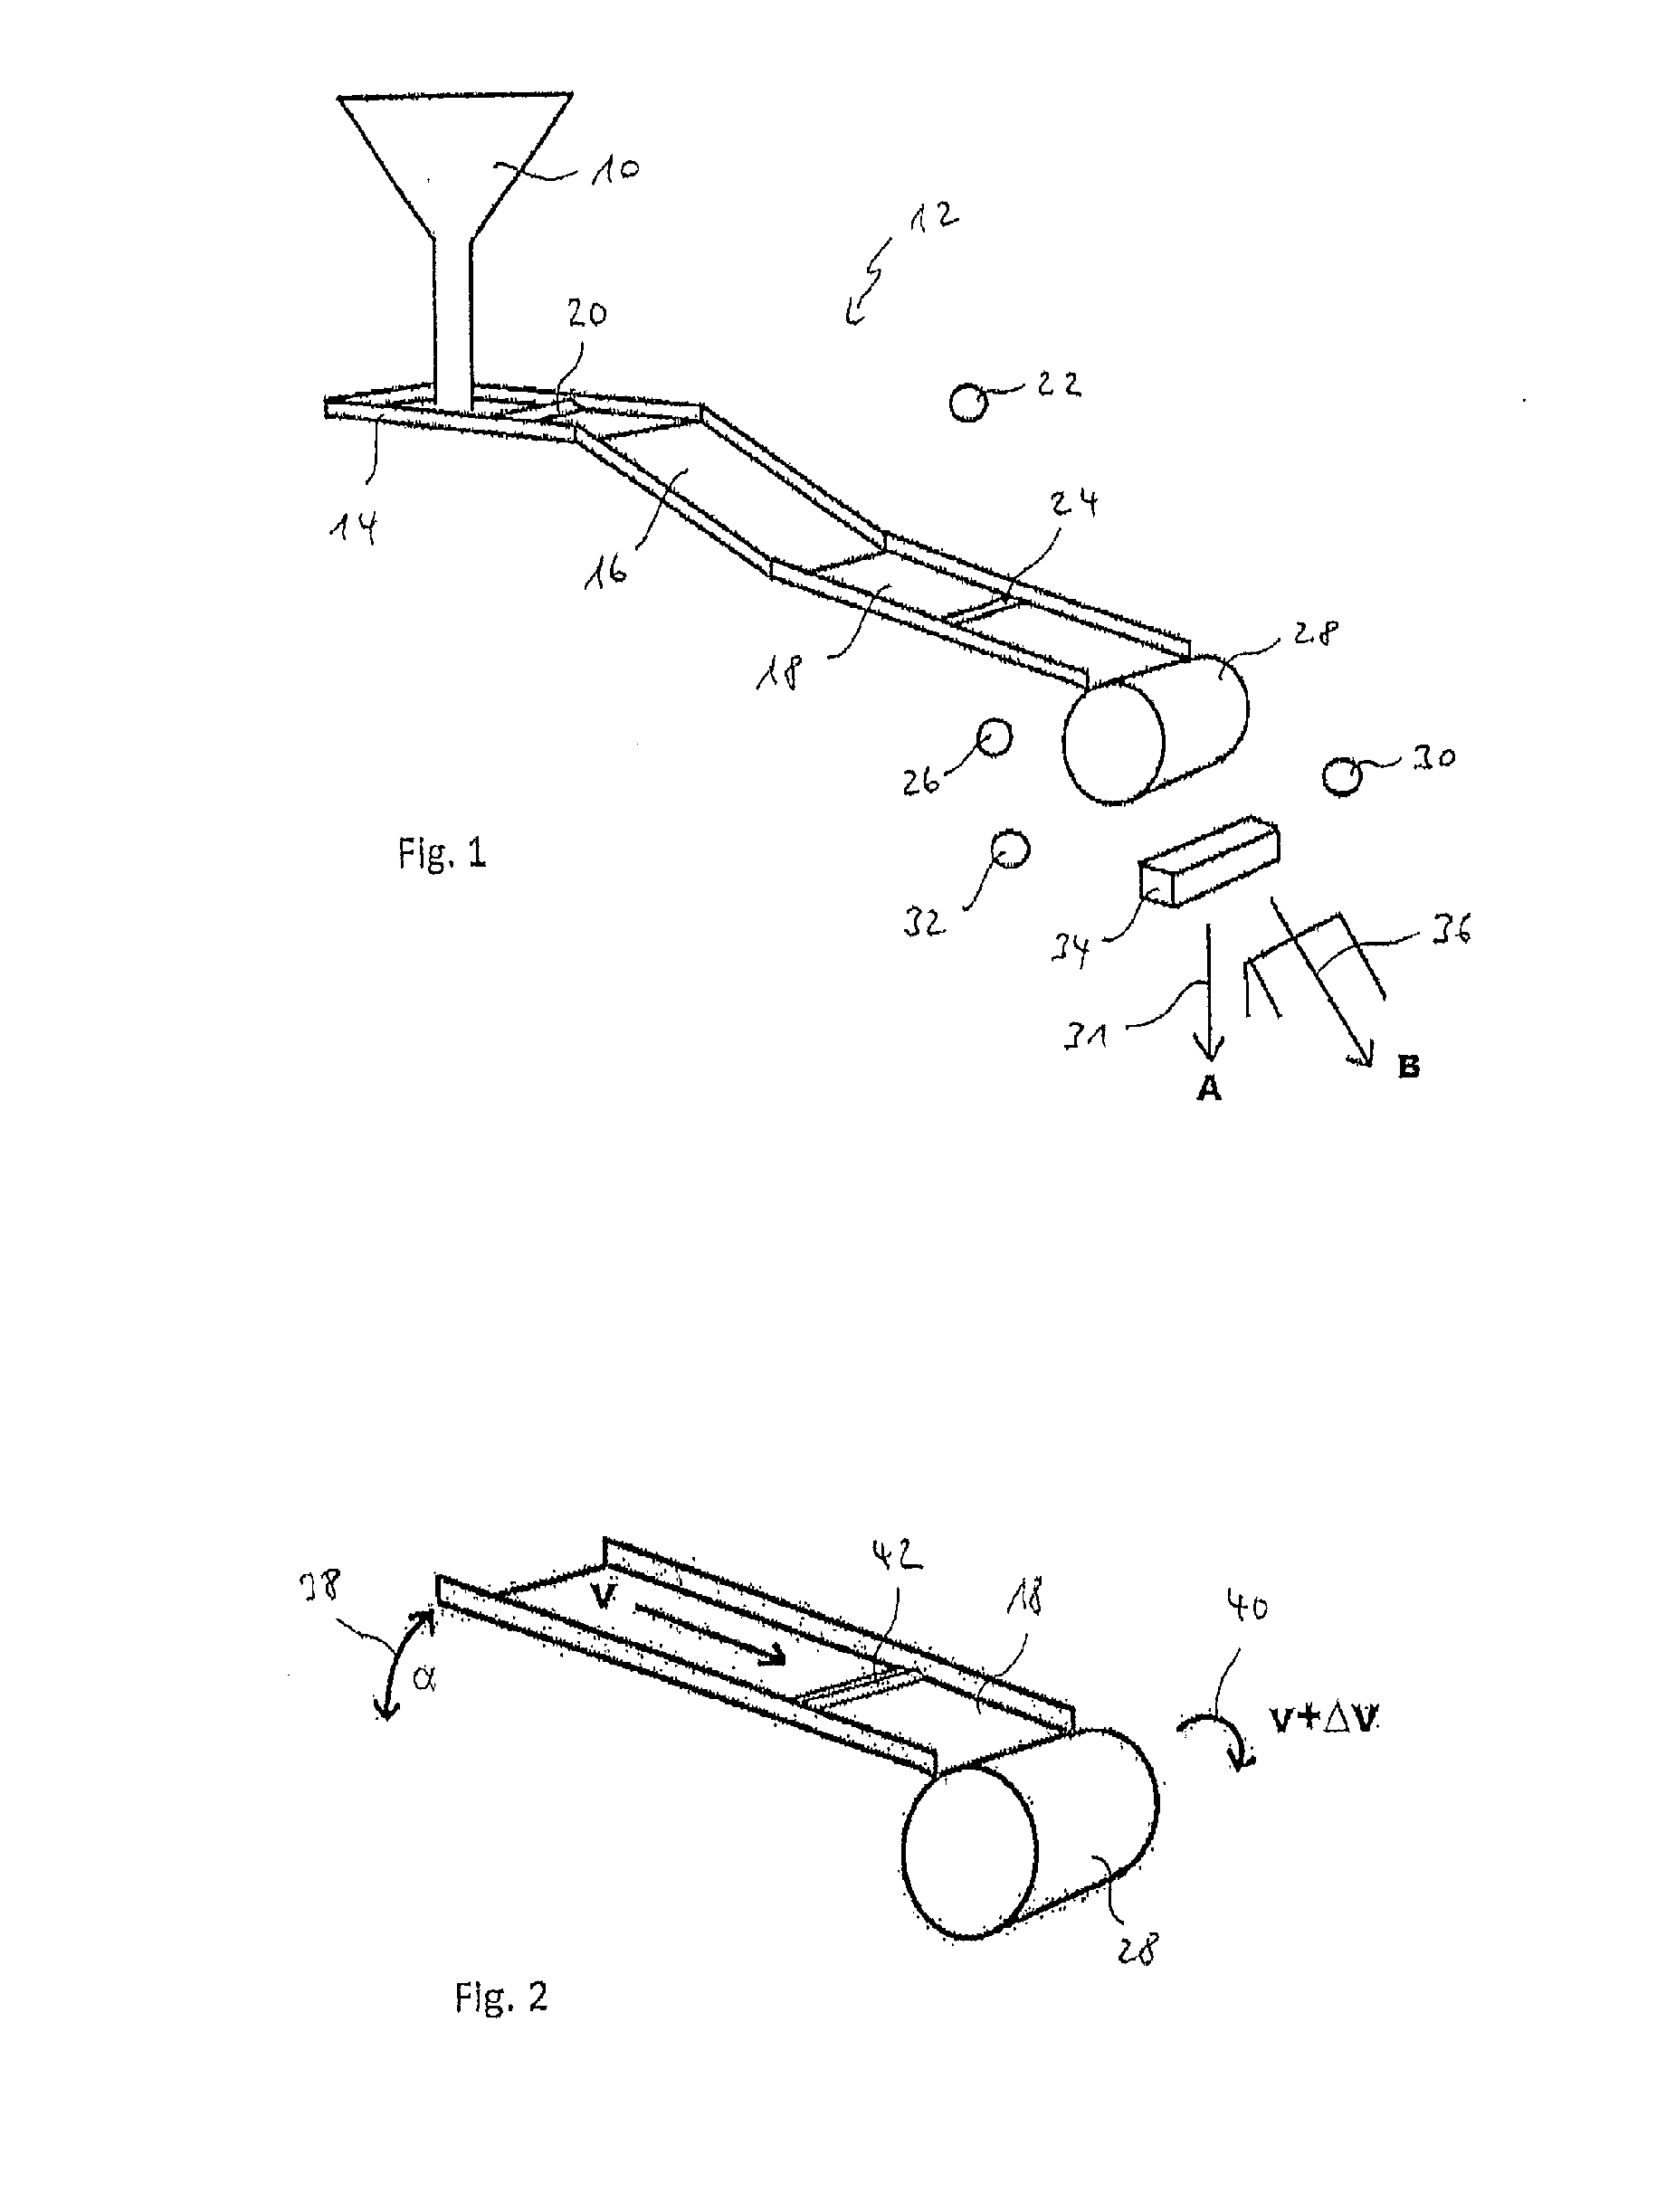 Device and method for sorting bulk material